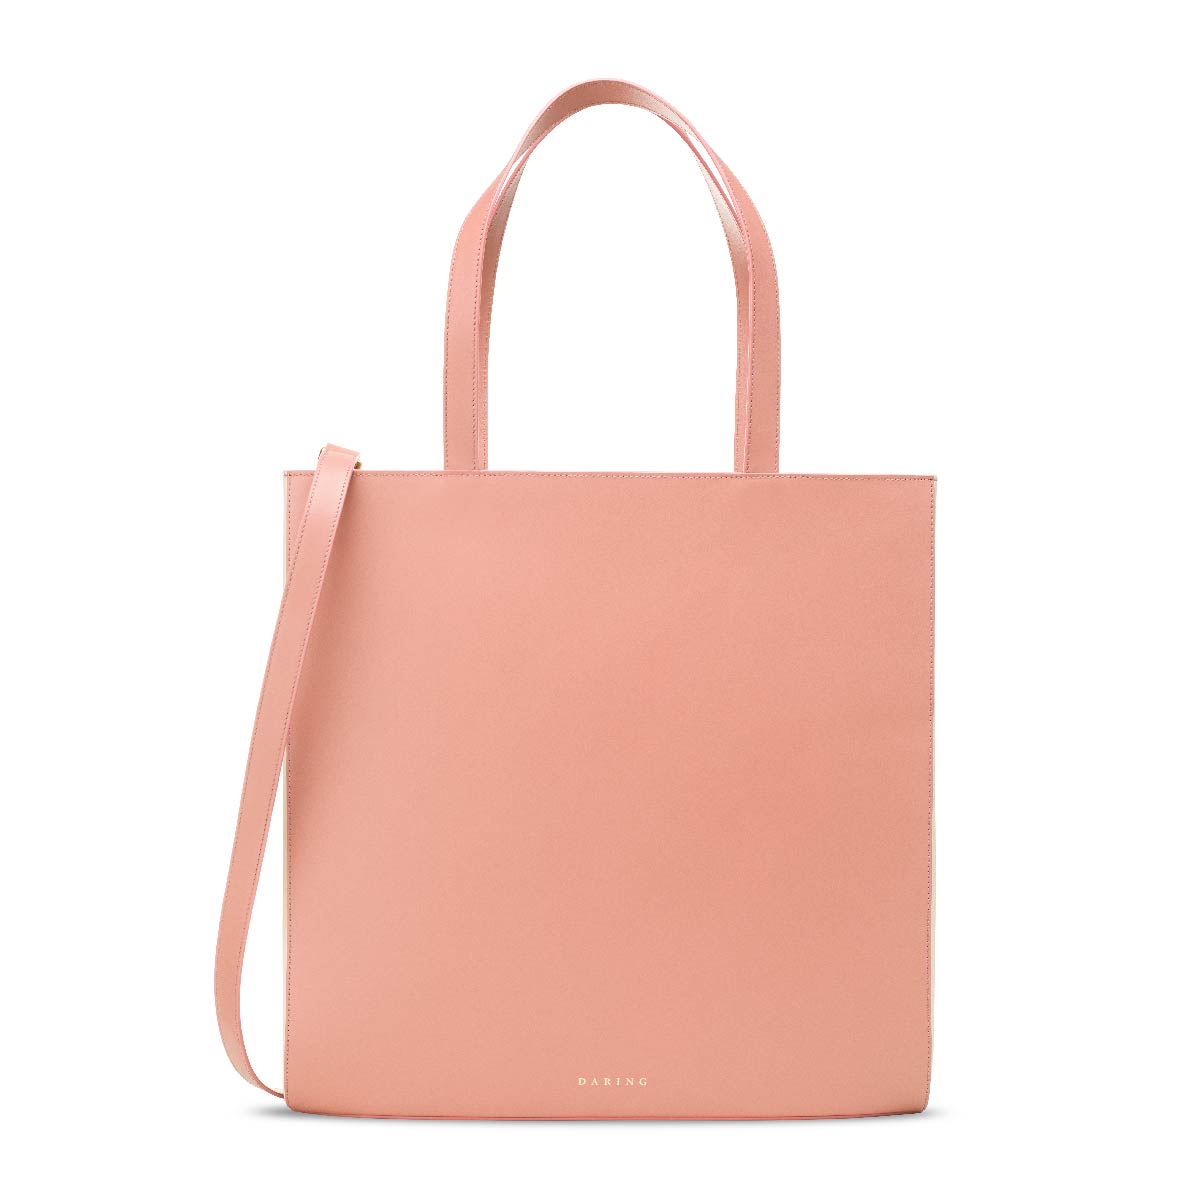 The Tote in Pink + Cream, with removable strap and top handles, front view.